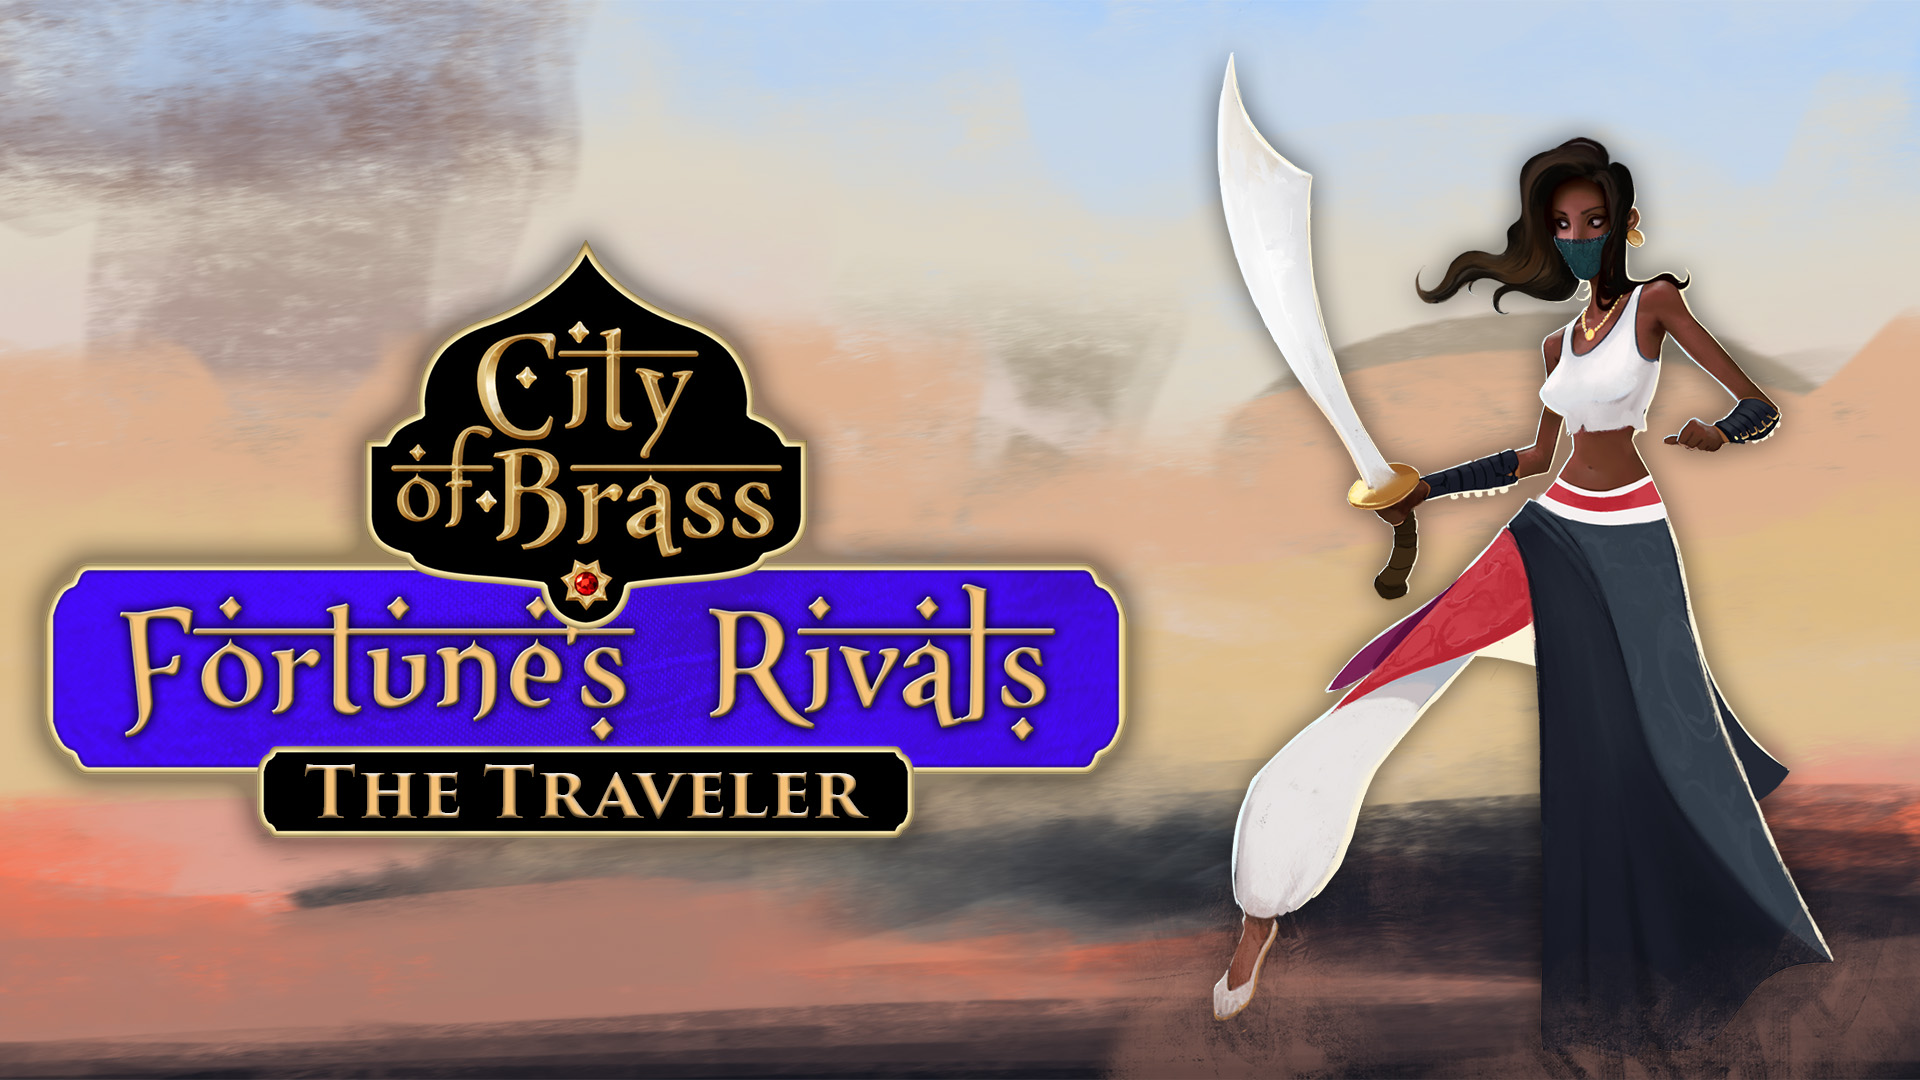 city of brass, fortune's rivals, fortunes rivals, city of brass fortunes rivals, city of brass update, fortunes rivals update, city of brass new characters, uppercut games, city of brass news, city of brass uppercut games, gigamax games, video game news, gaming news